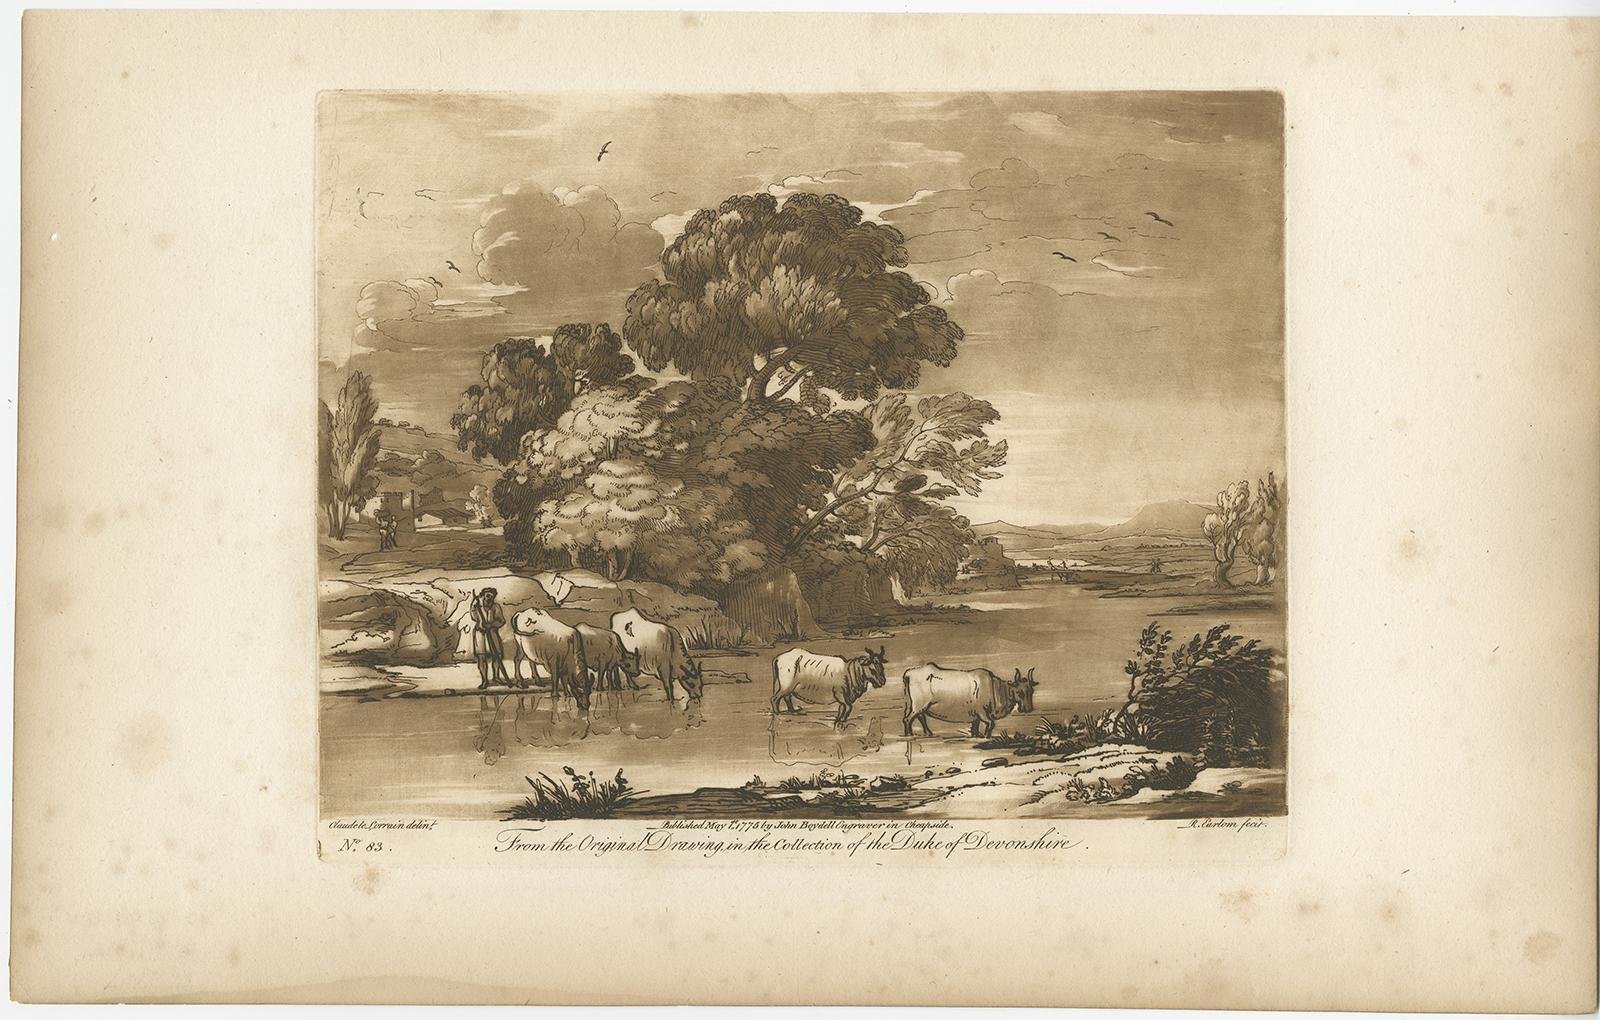 Antique print of a landscape with cattle. Mezzotint with etched lines, printed in sepia. Engraved by Richard Earlom (1743 - 1822) after a sketch in the copy of Claude le Lorrain's 'Liber Veritatis' owned by the Duke of Devonshire at